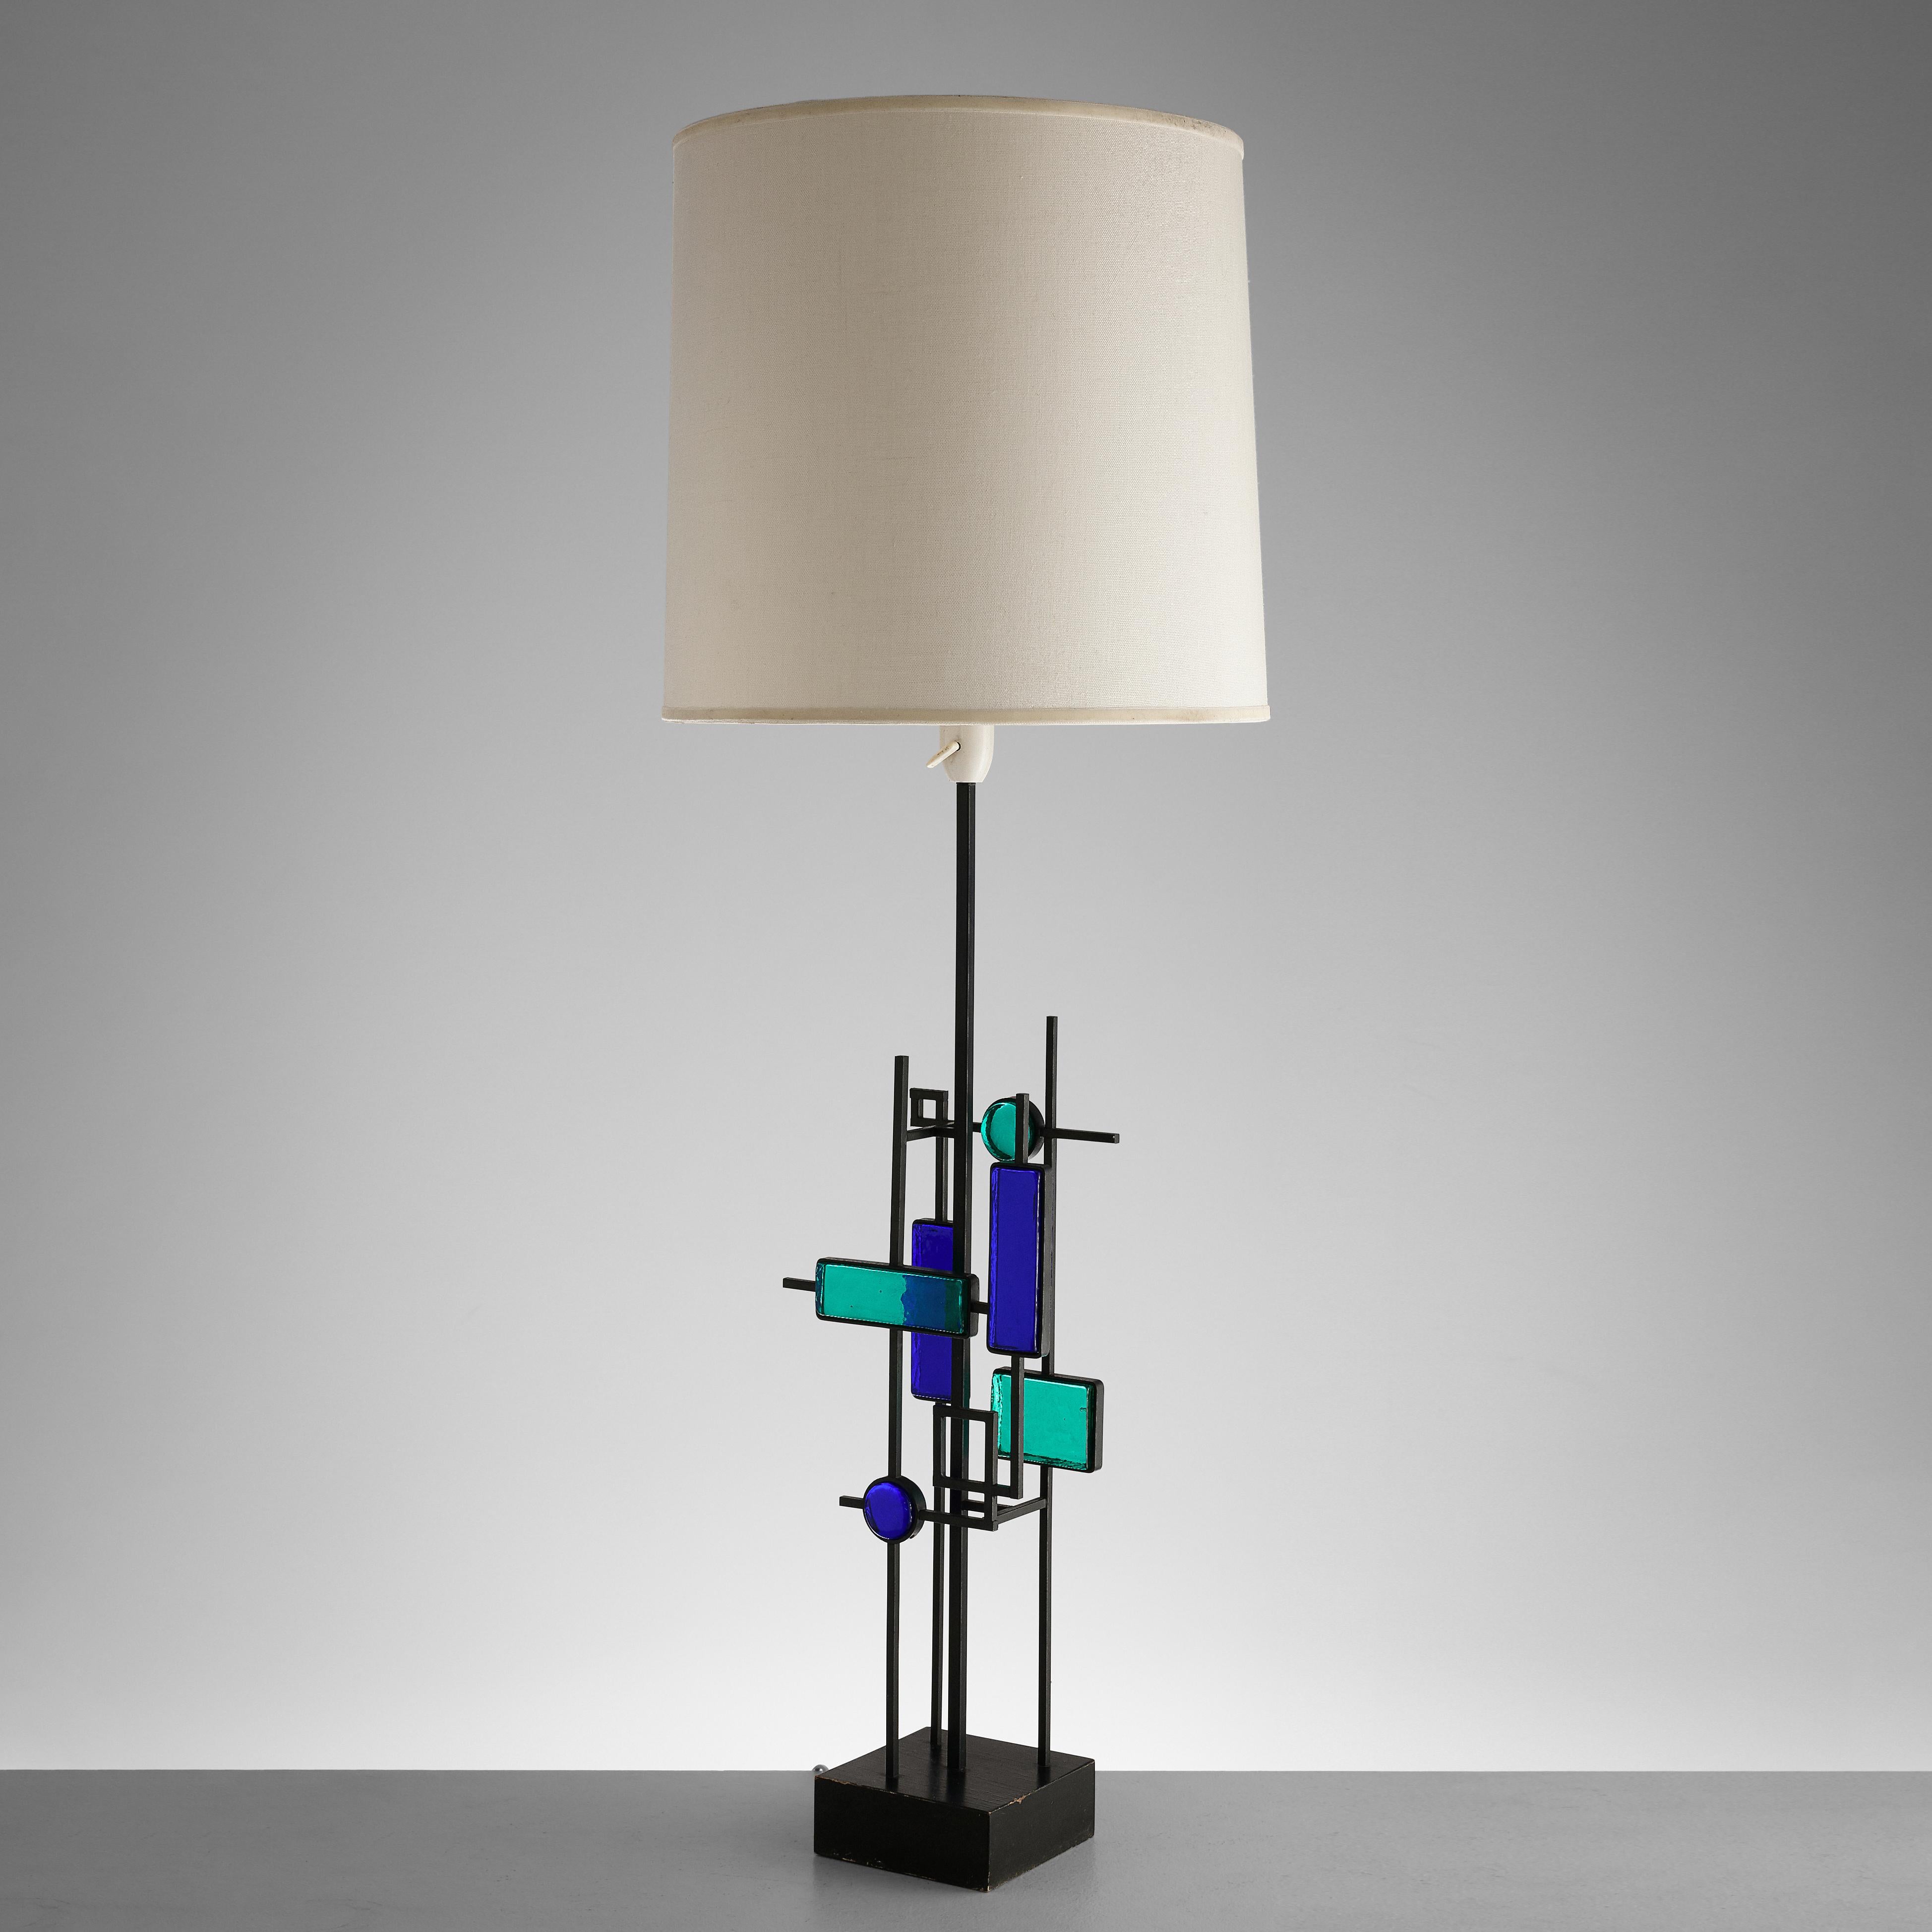 Mid-20th Century  Svend Aage Holm Sørensen Sculptural Table Lamp with Iron Frame and Glass  For Sale